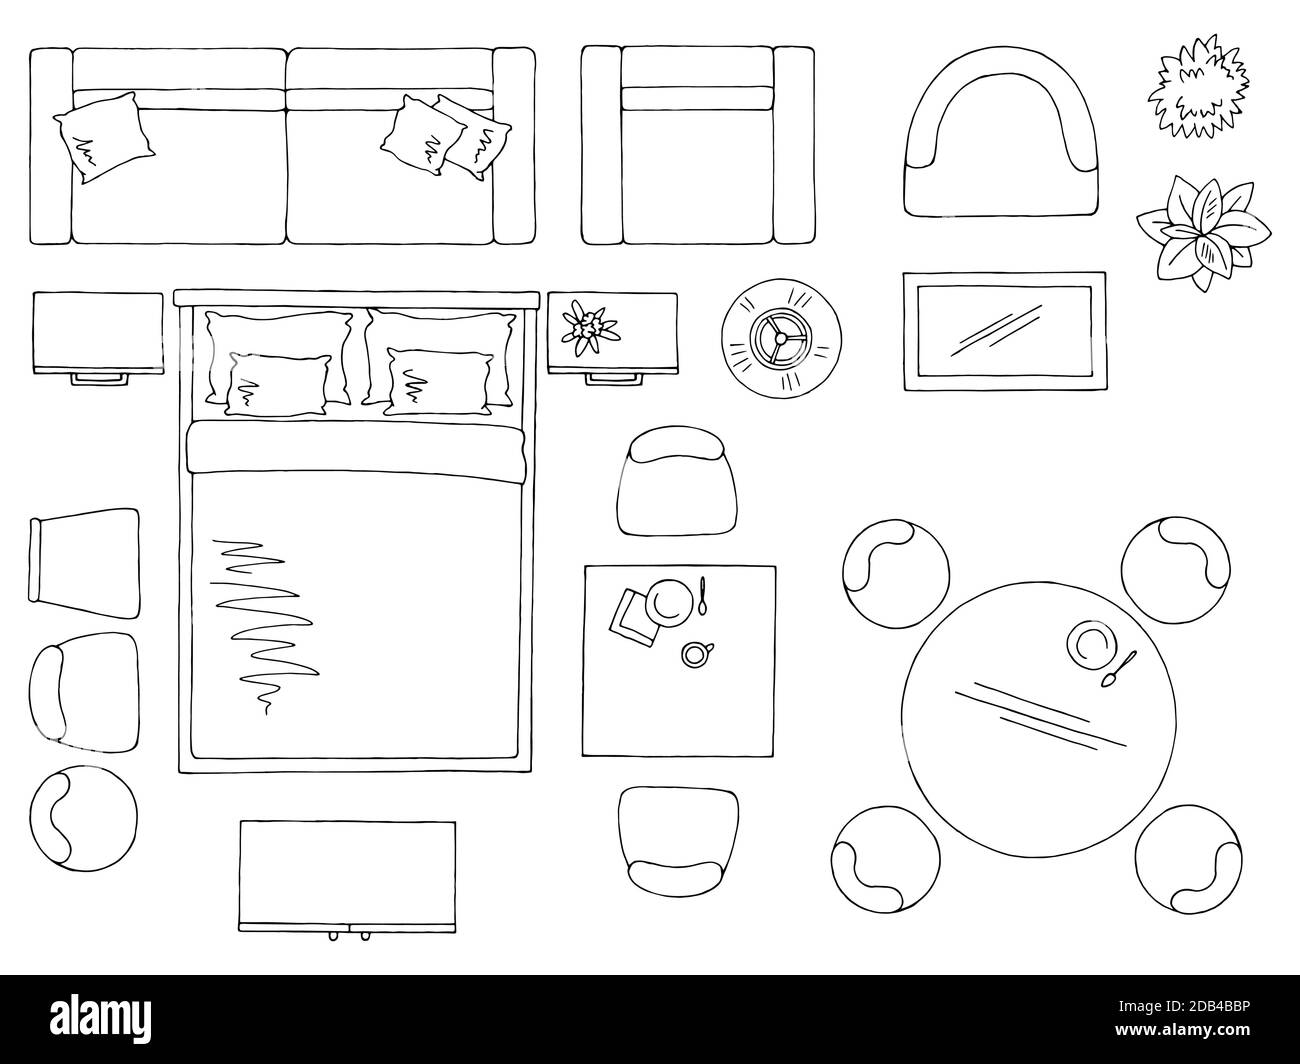 Furniture set floor plan architect design element graphic black white top sketch aerial view isolated illustration vector Stock Vector